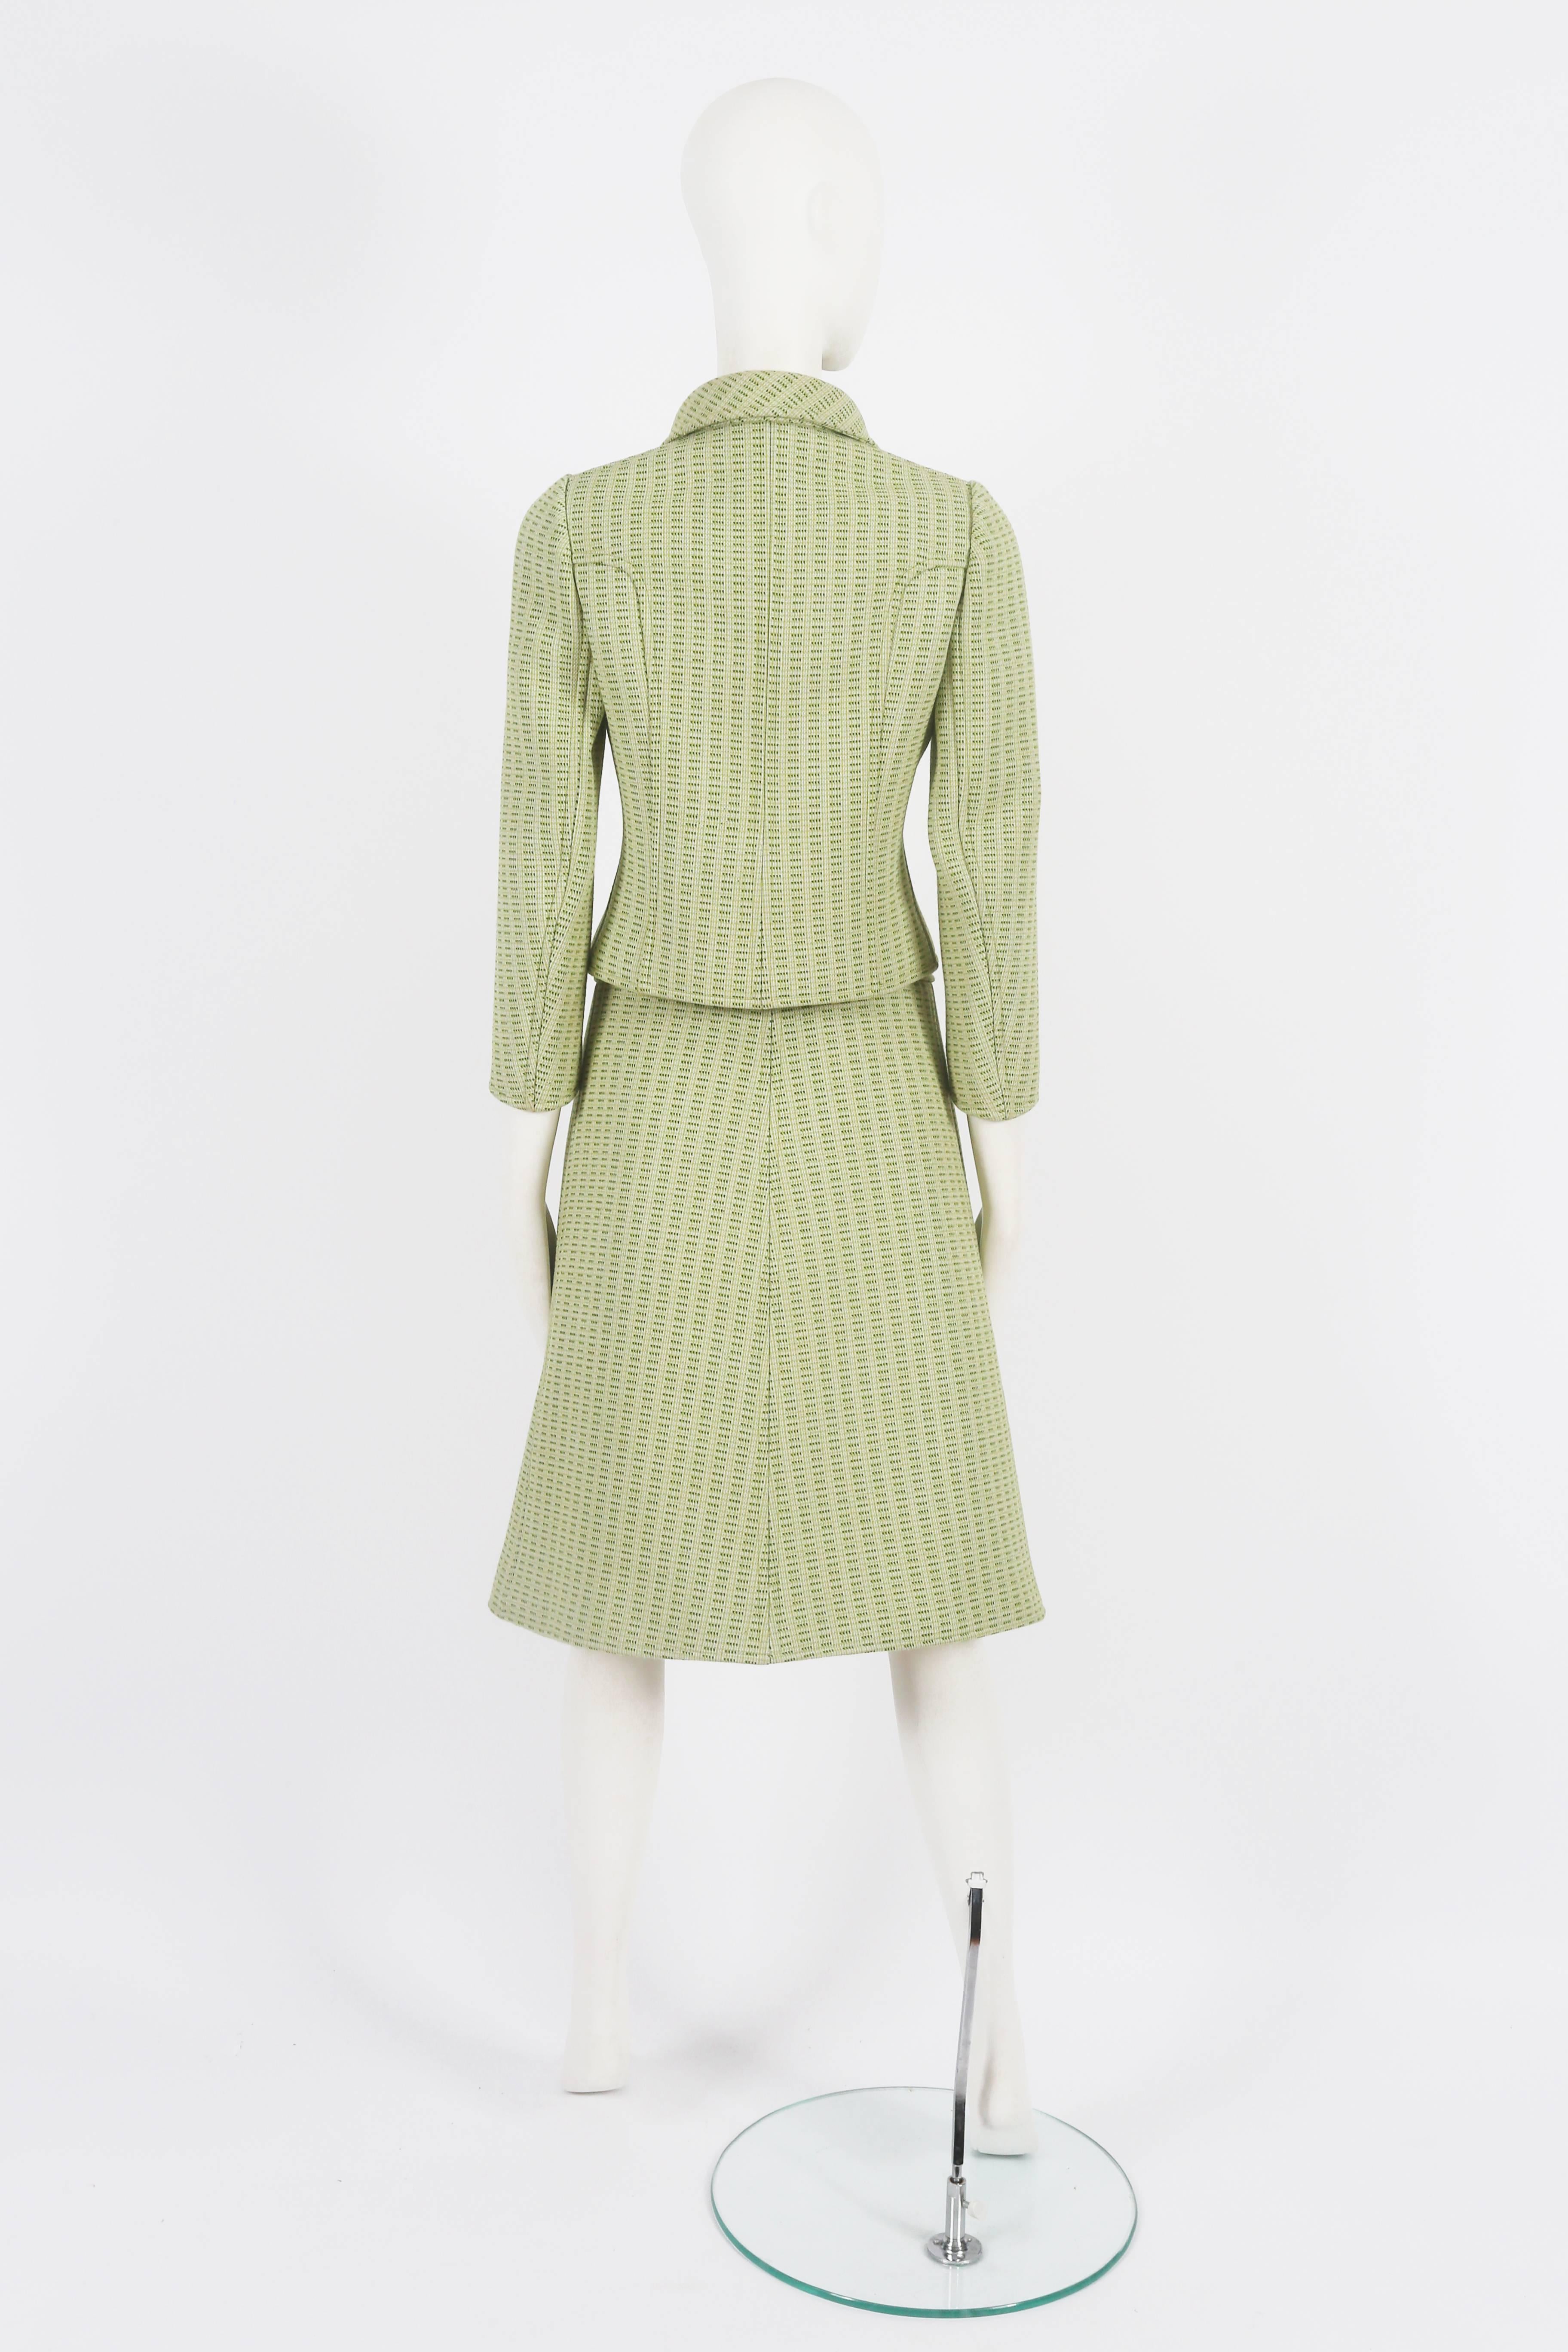 Courreges Haute Couture lime green wool jacket and skirt suit, c. 1969 In Excellent Condition For Sale In London, GB